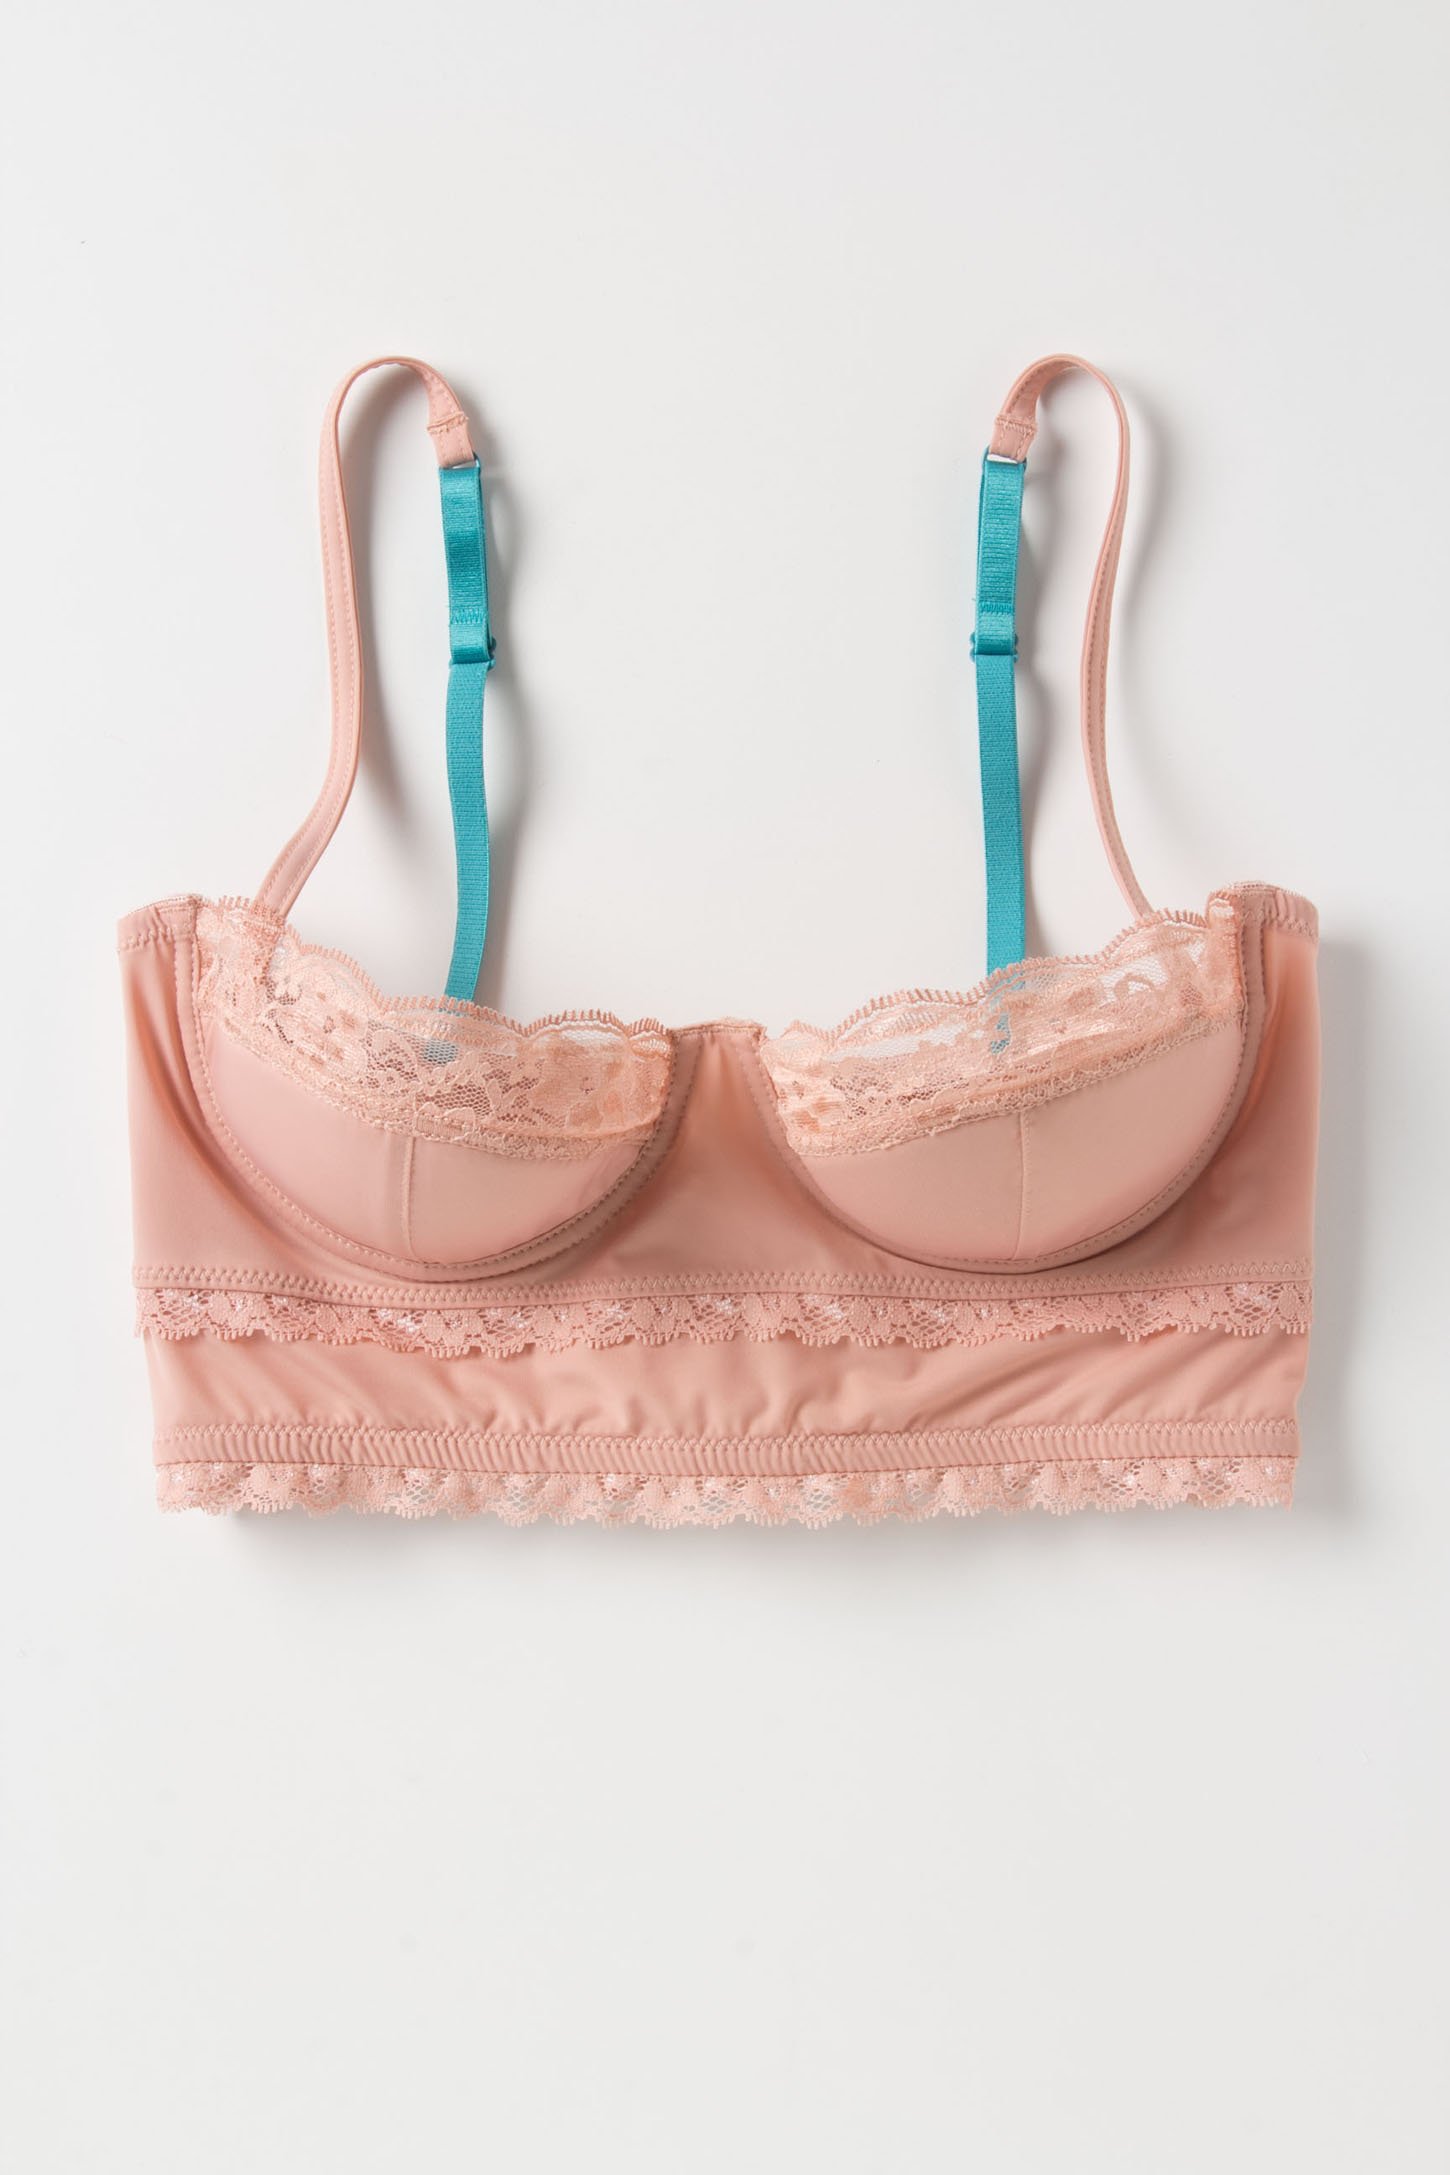 Lyst - Eloise Clouded Morning Bra in Pink